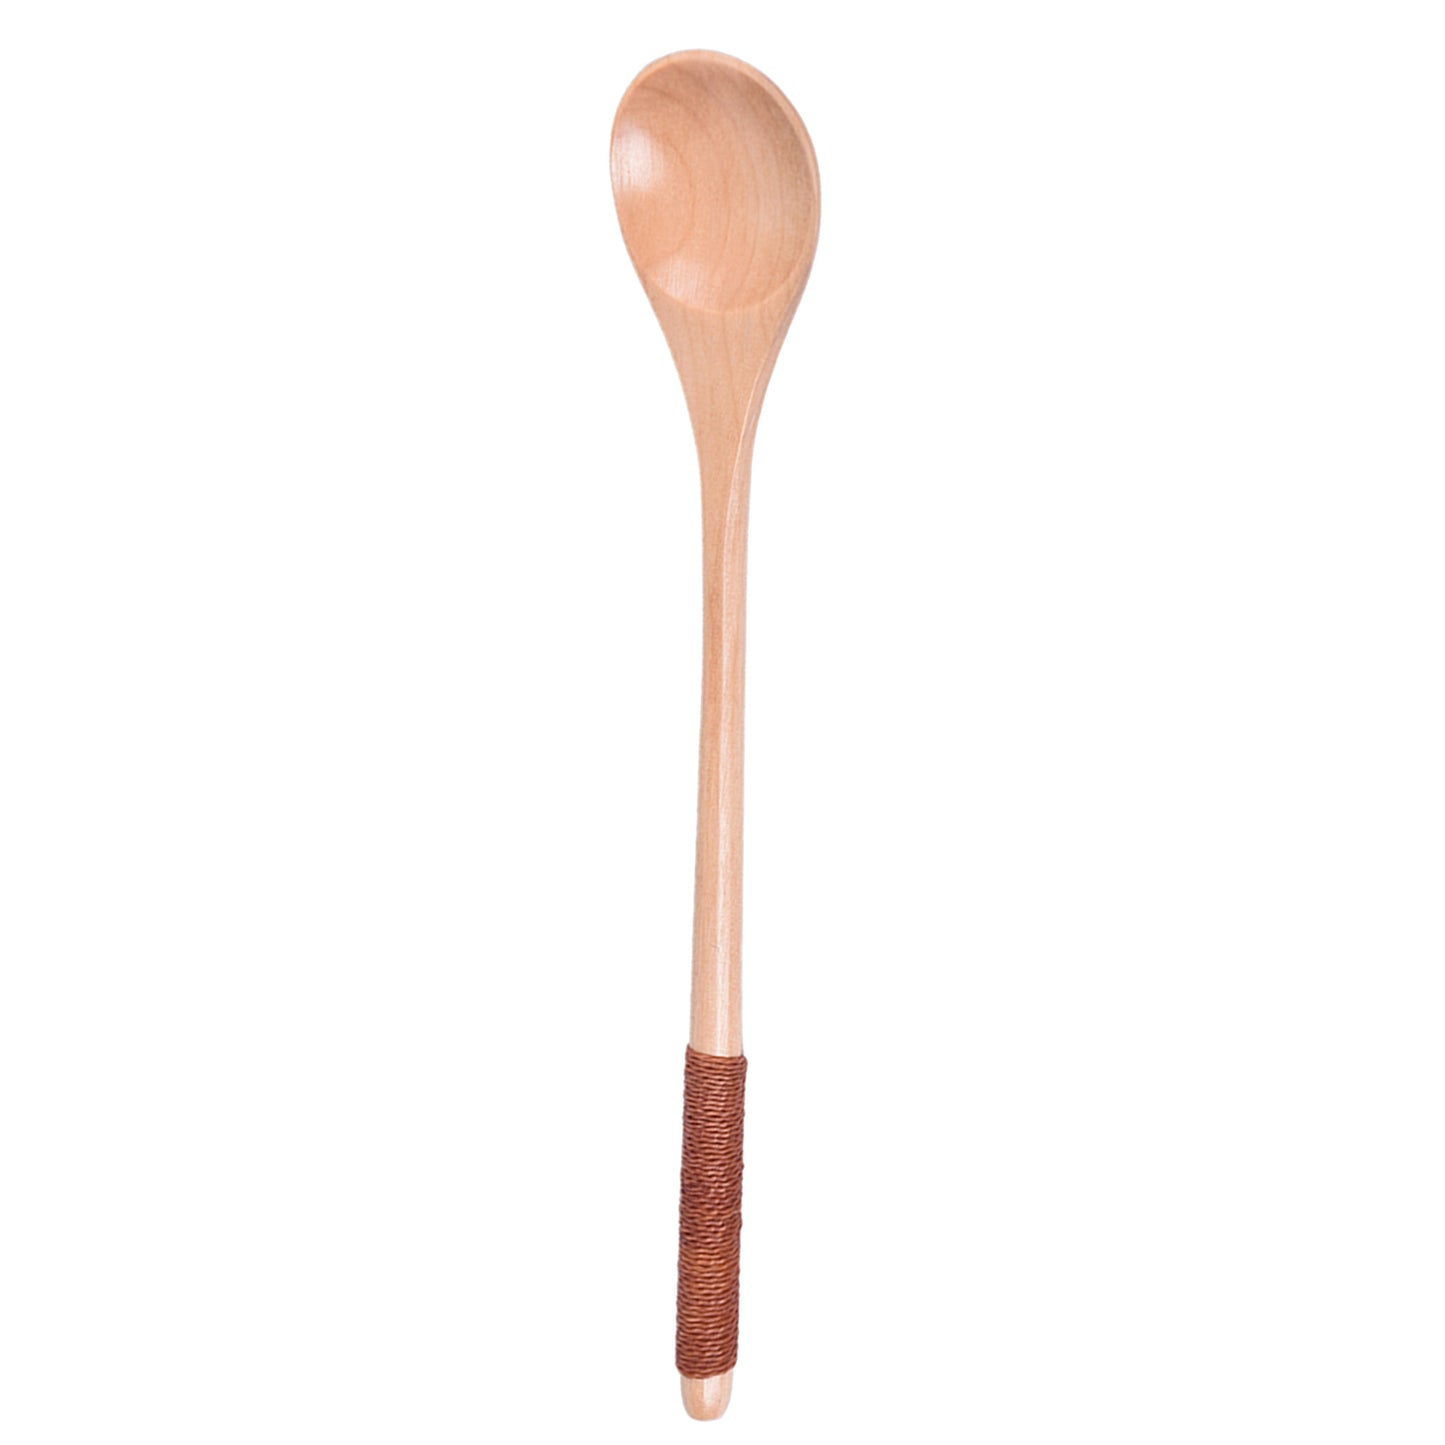 Bamboo Soup Spoon